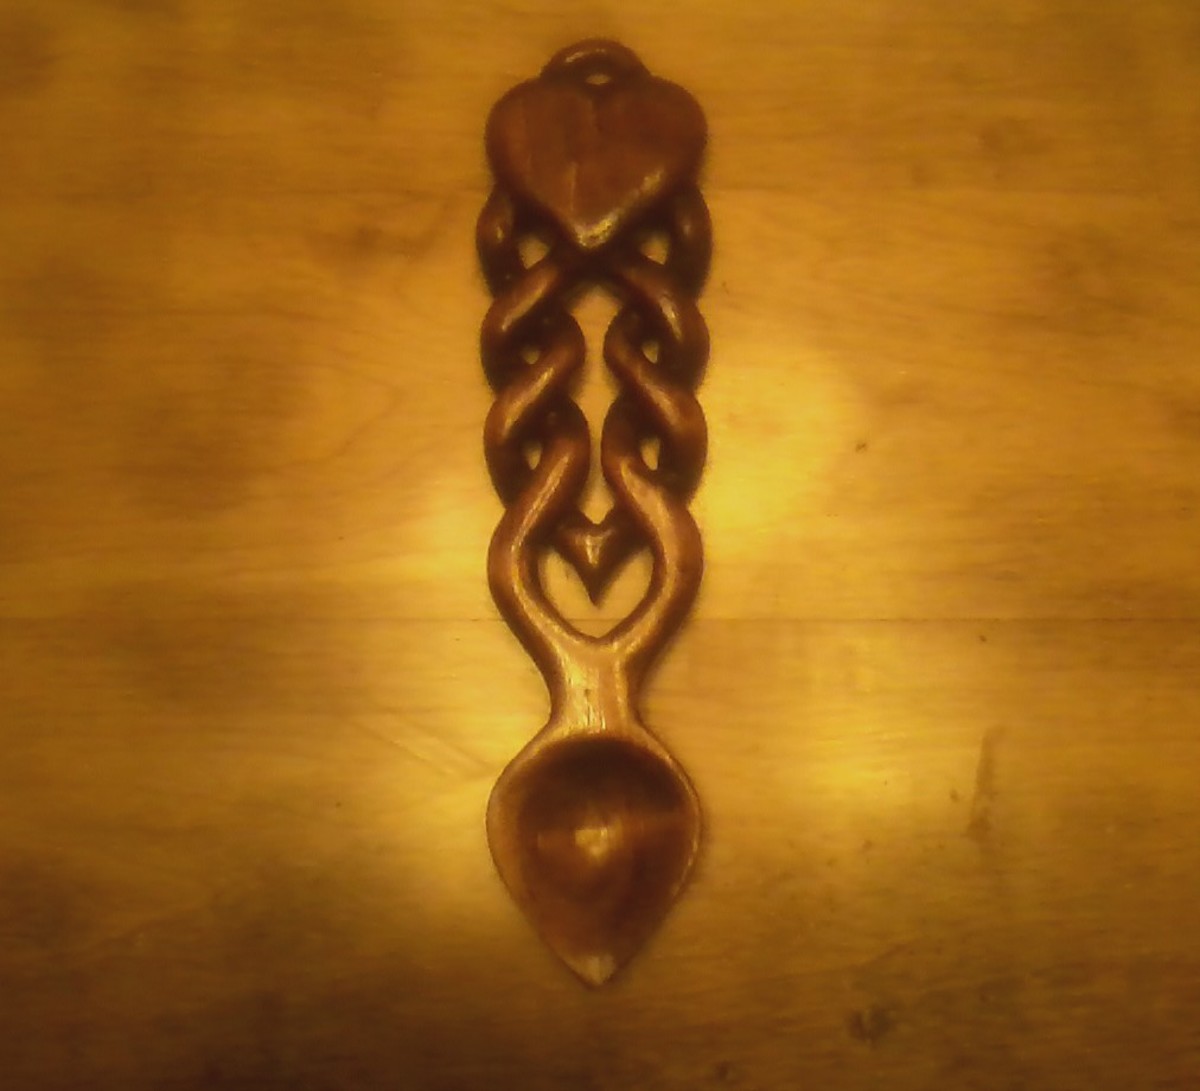 The finished Welsh Love Spoon